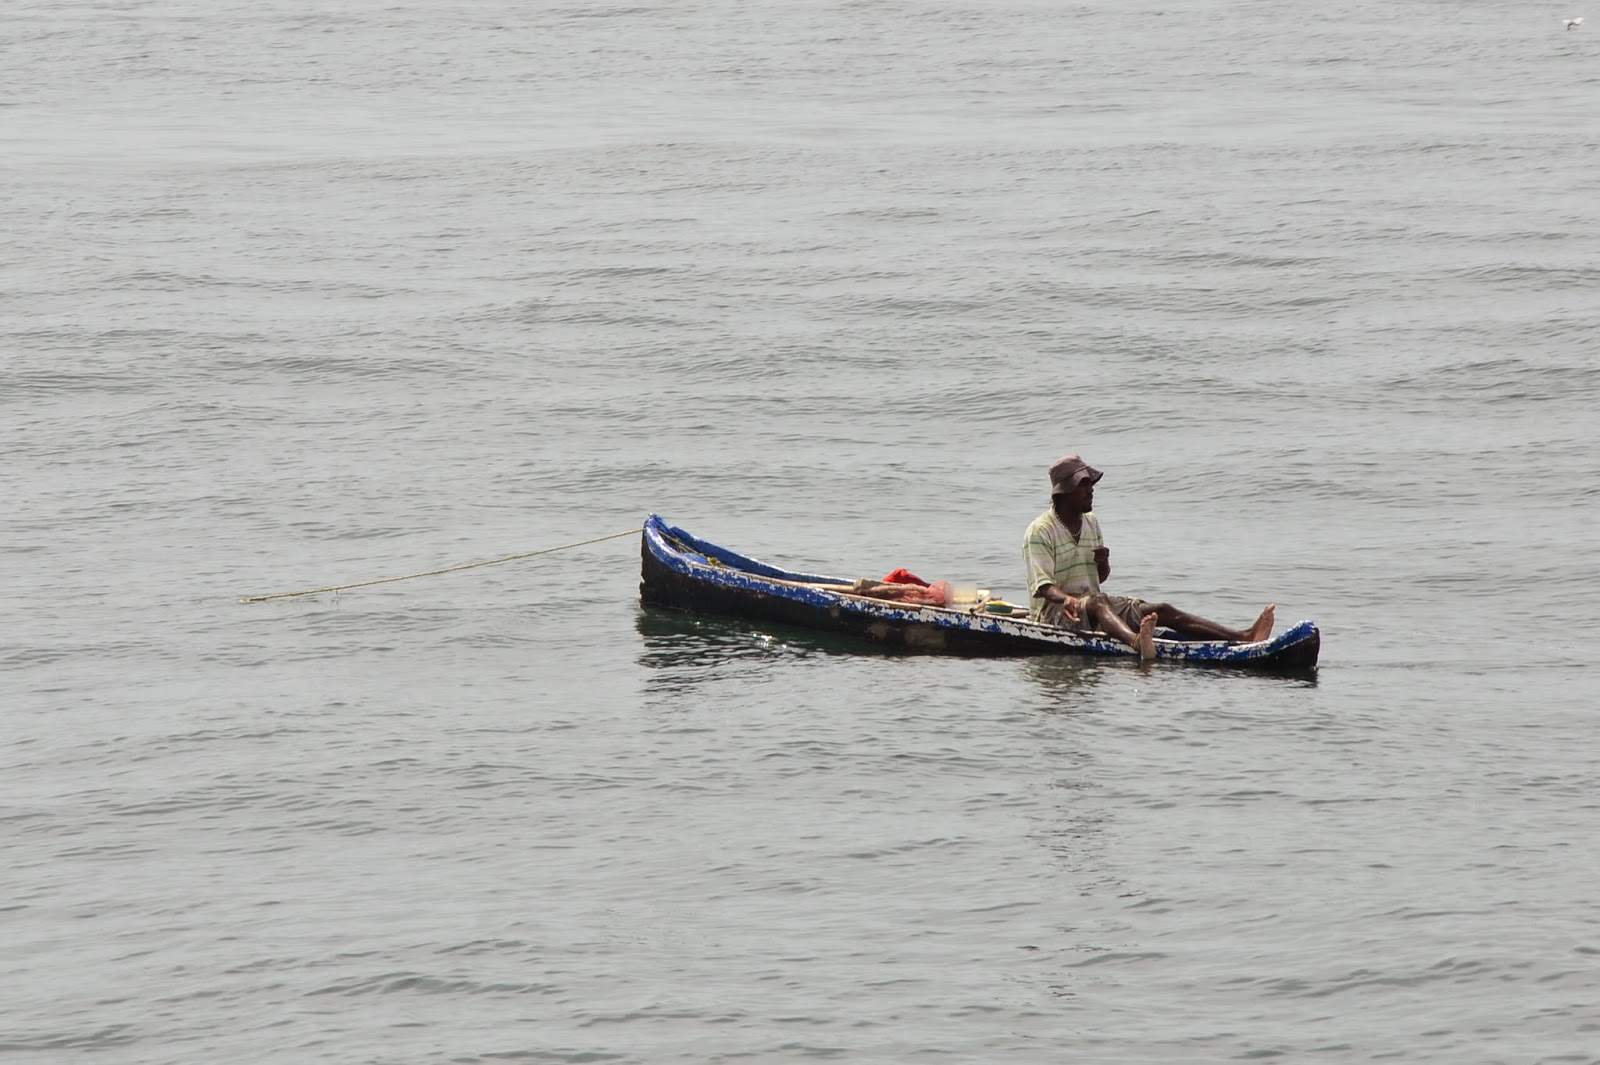 A fisherman on the Caribbean Sea in Colombia